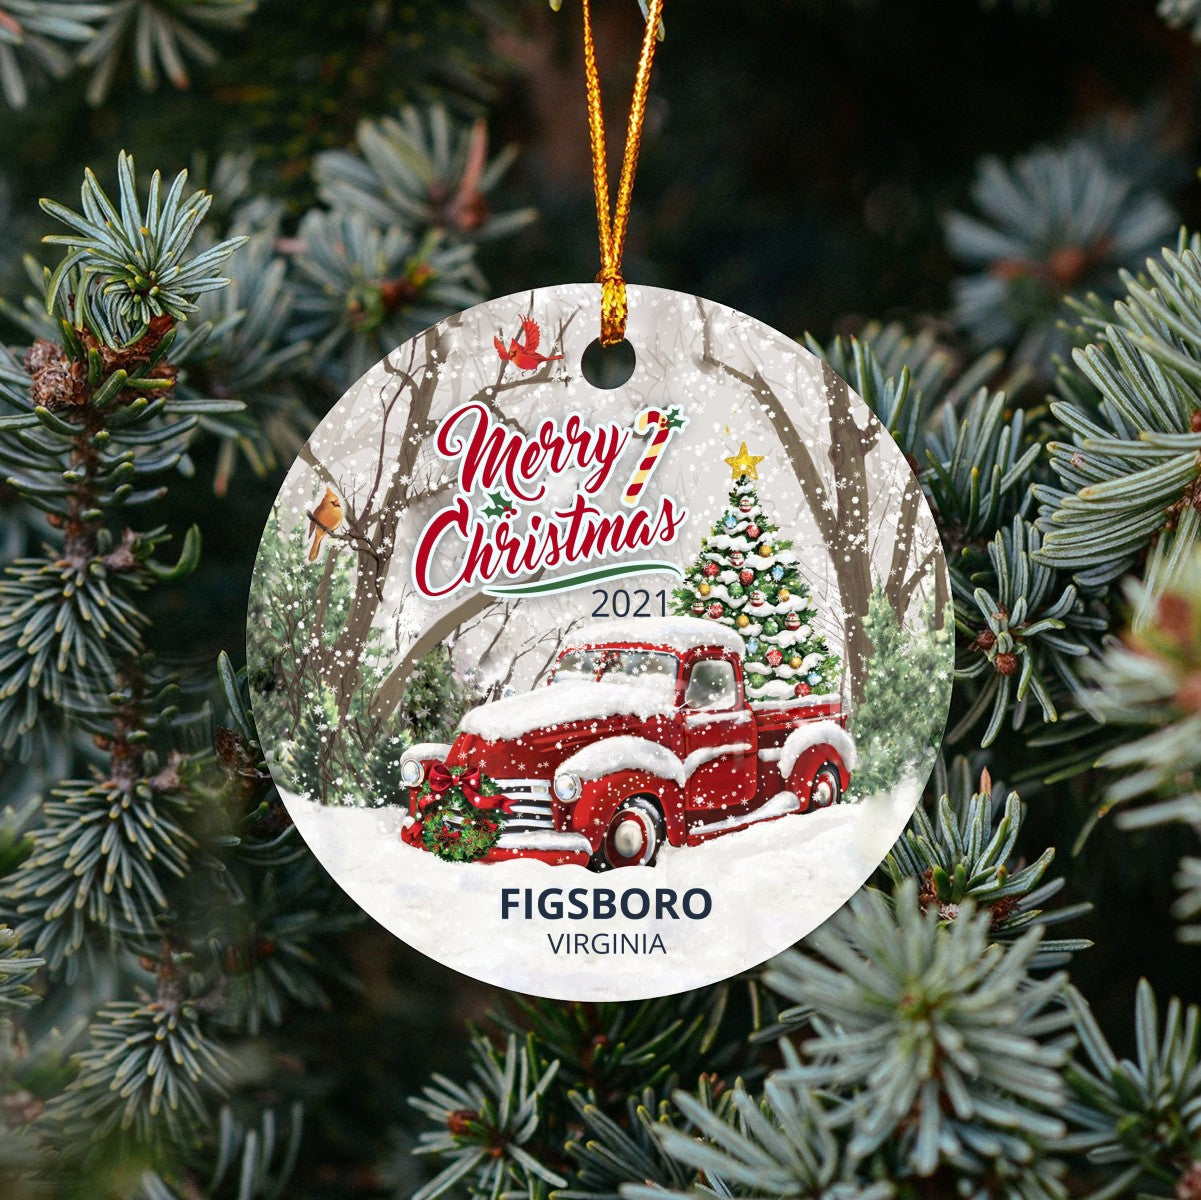 Christmas Tree Ornaments Figsboro - Ornament With Name City, State Figsboro Virginia VA Ornament - Red Truck Xmas Ornaments 3'' Plastic Gift For Family, Friend And Housewarming